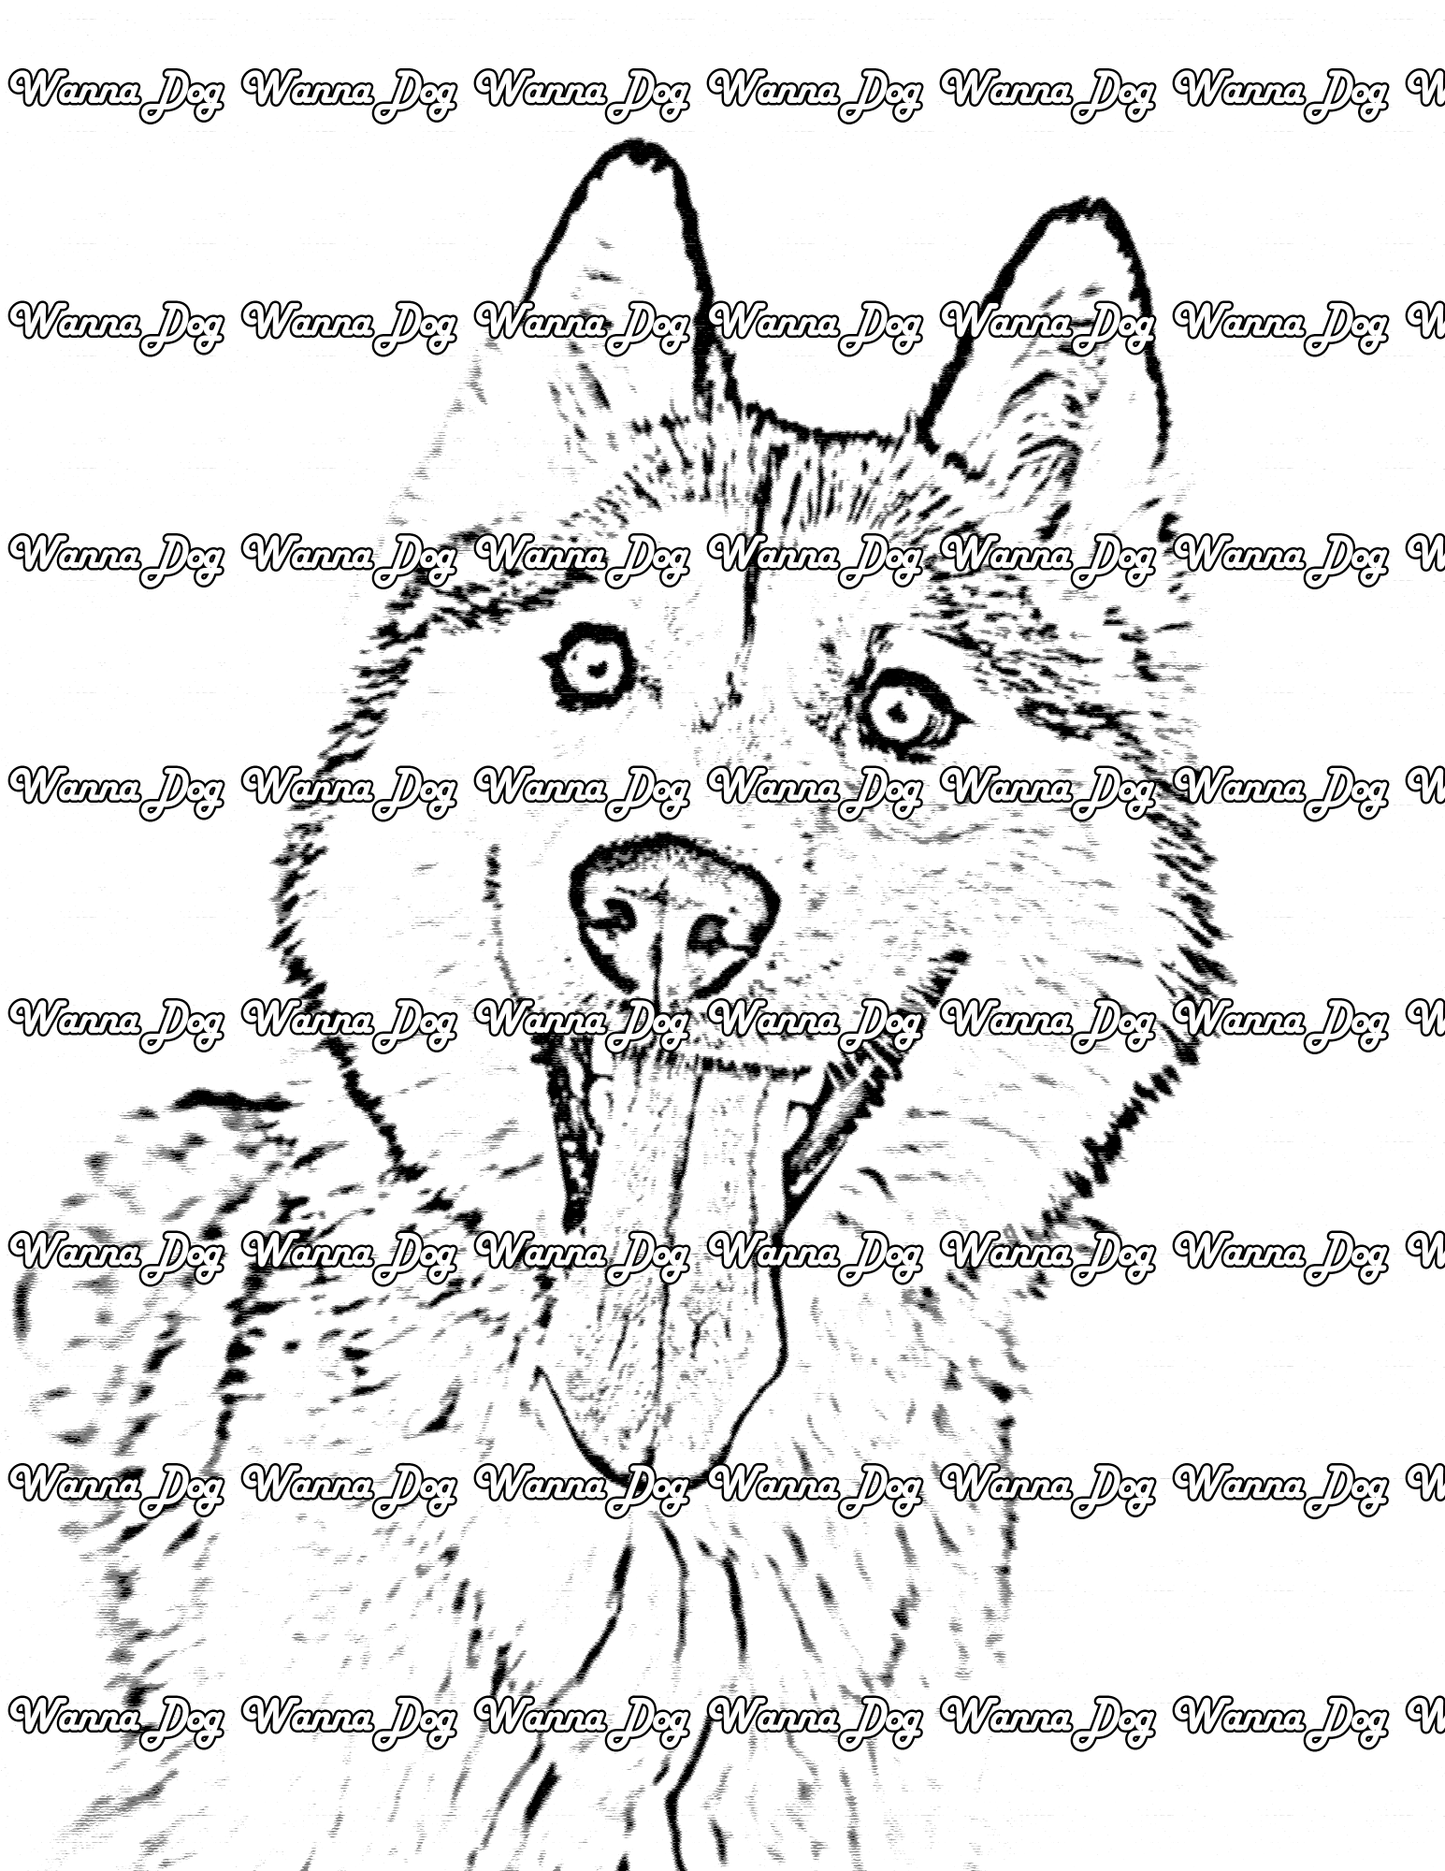 Siberian Husky Coloring Page of a Siberian Husky smiling with their tongue out